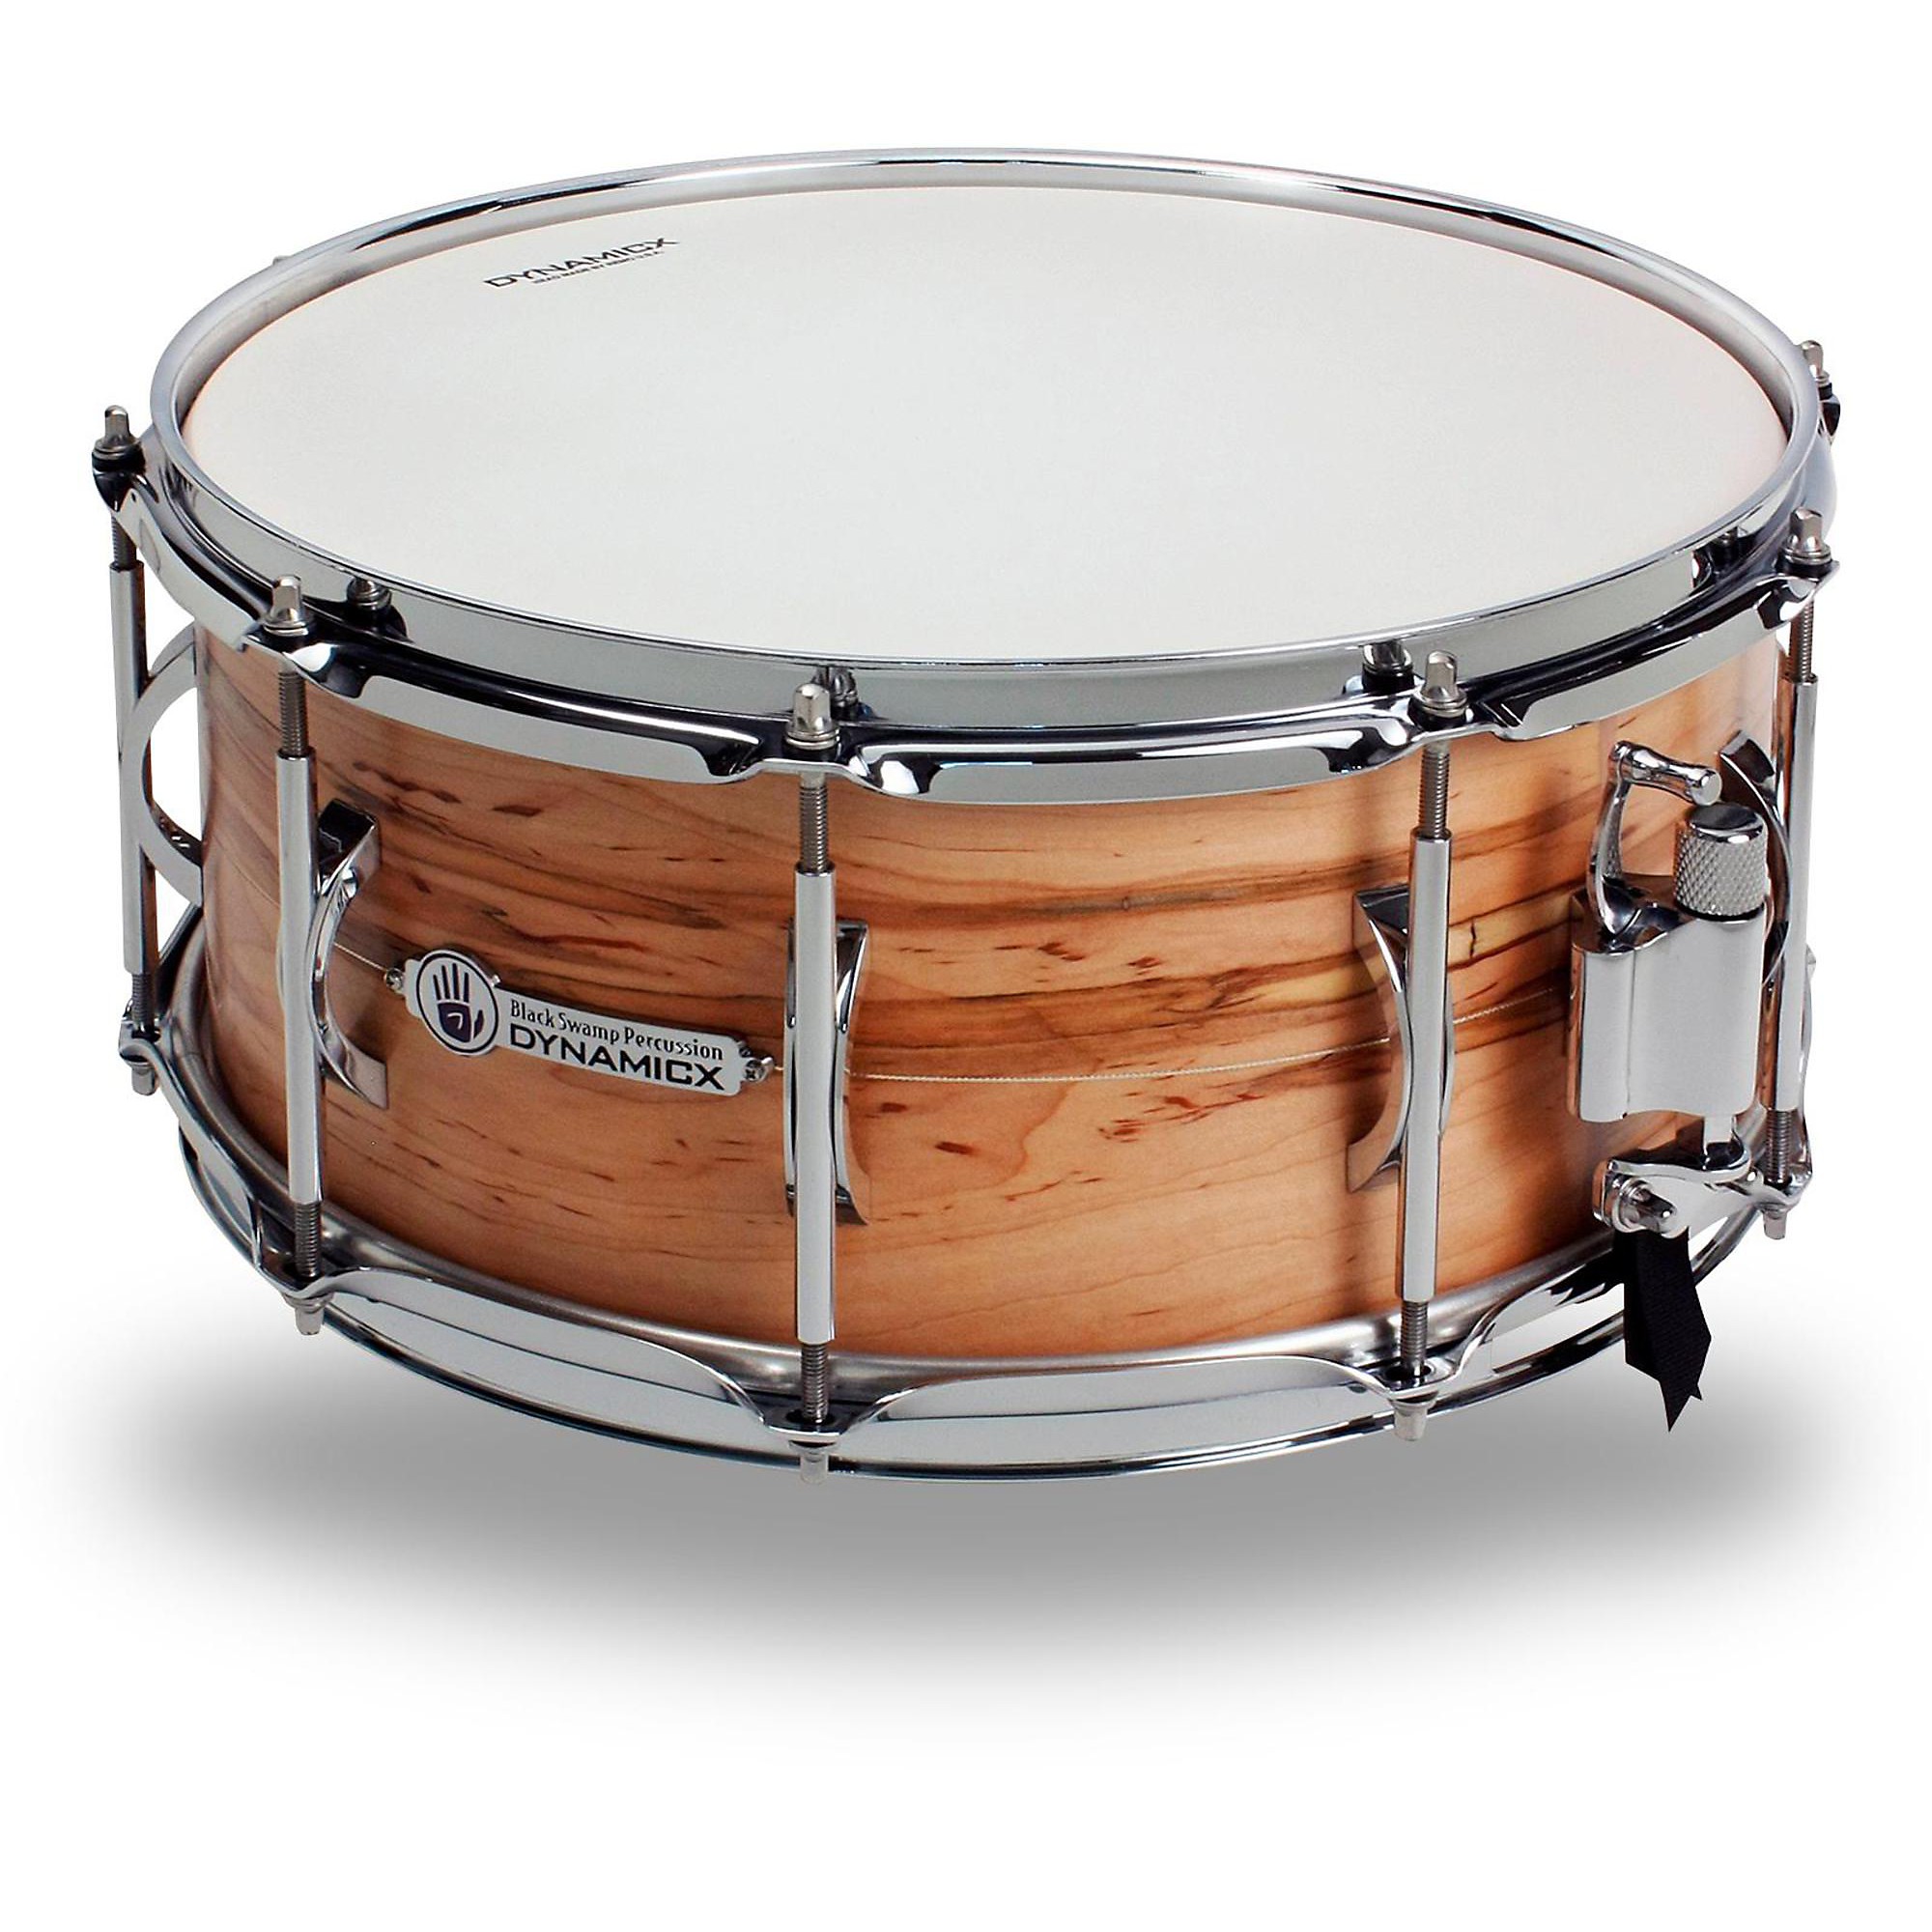 Black Swamp Percussion Dynamicx Live Series Snare Drum | Music